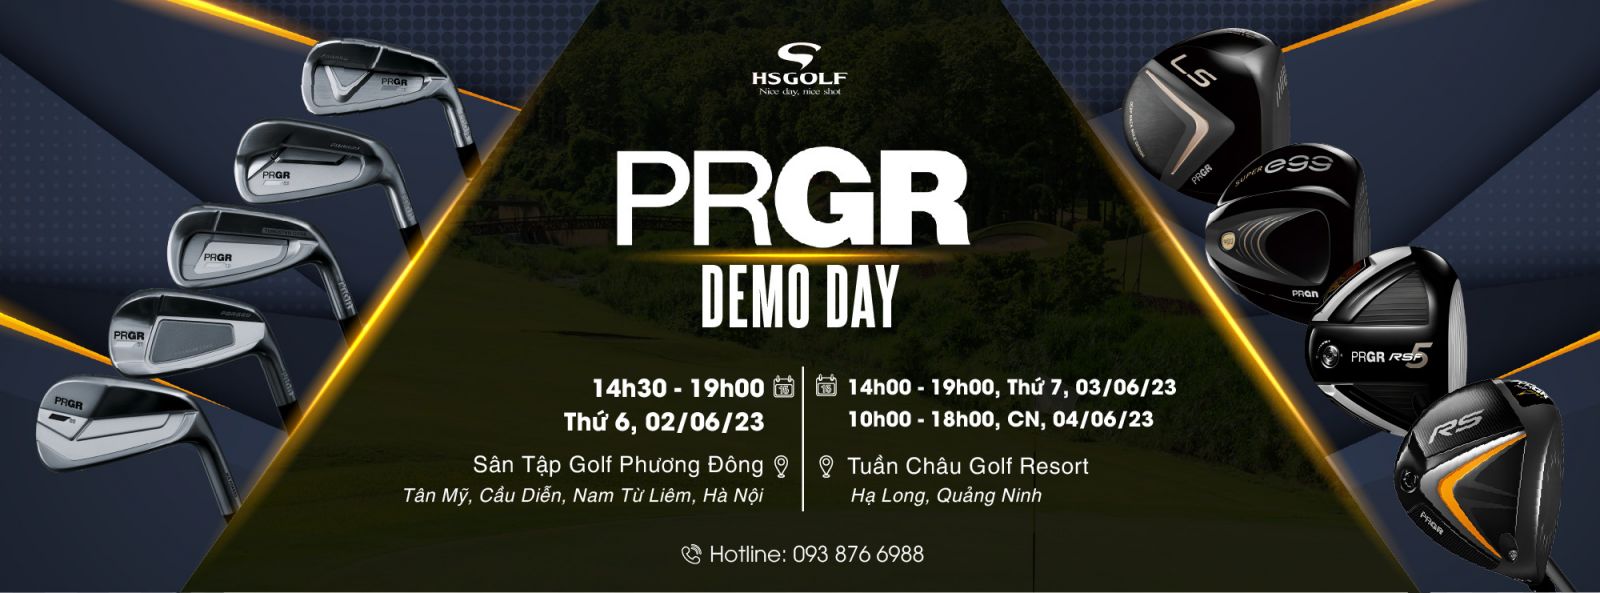 HS Golf tổ chức PRGR Demo Day